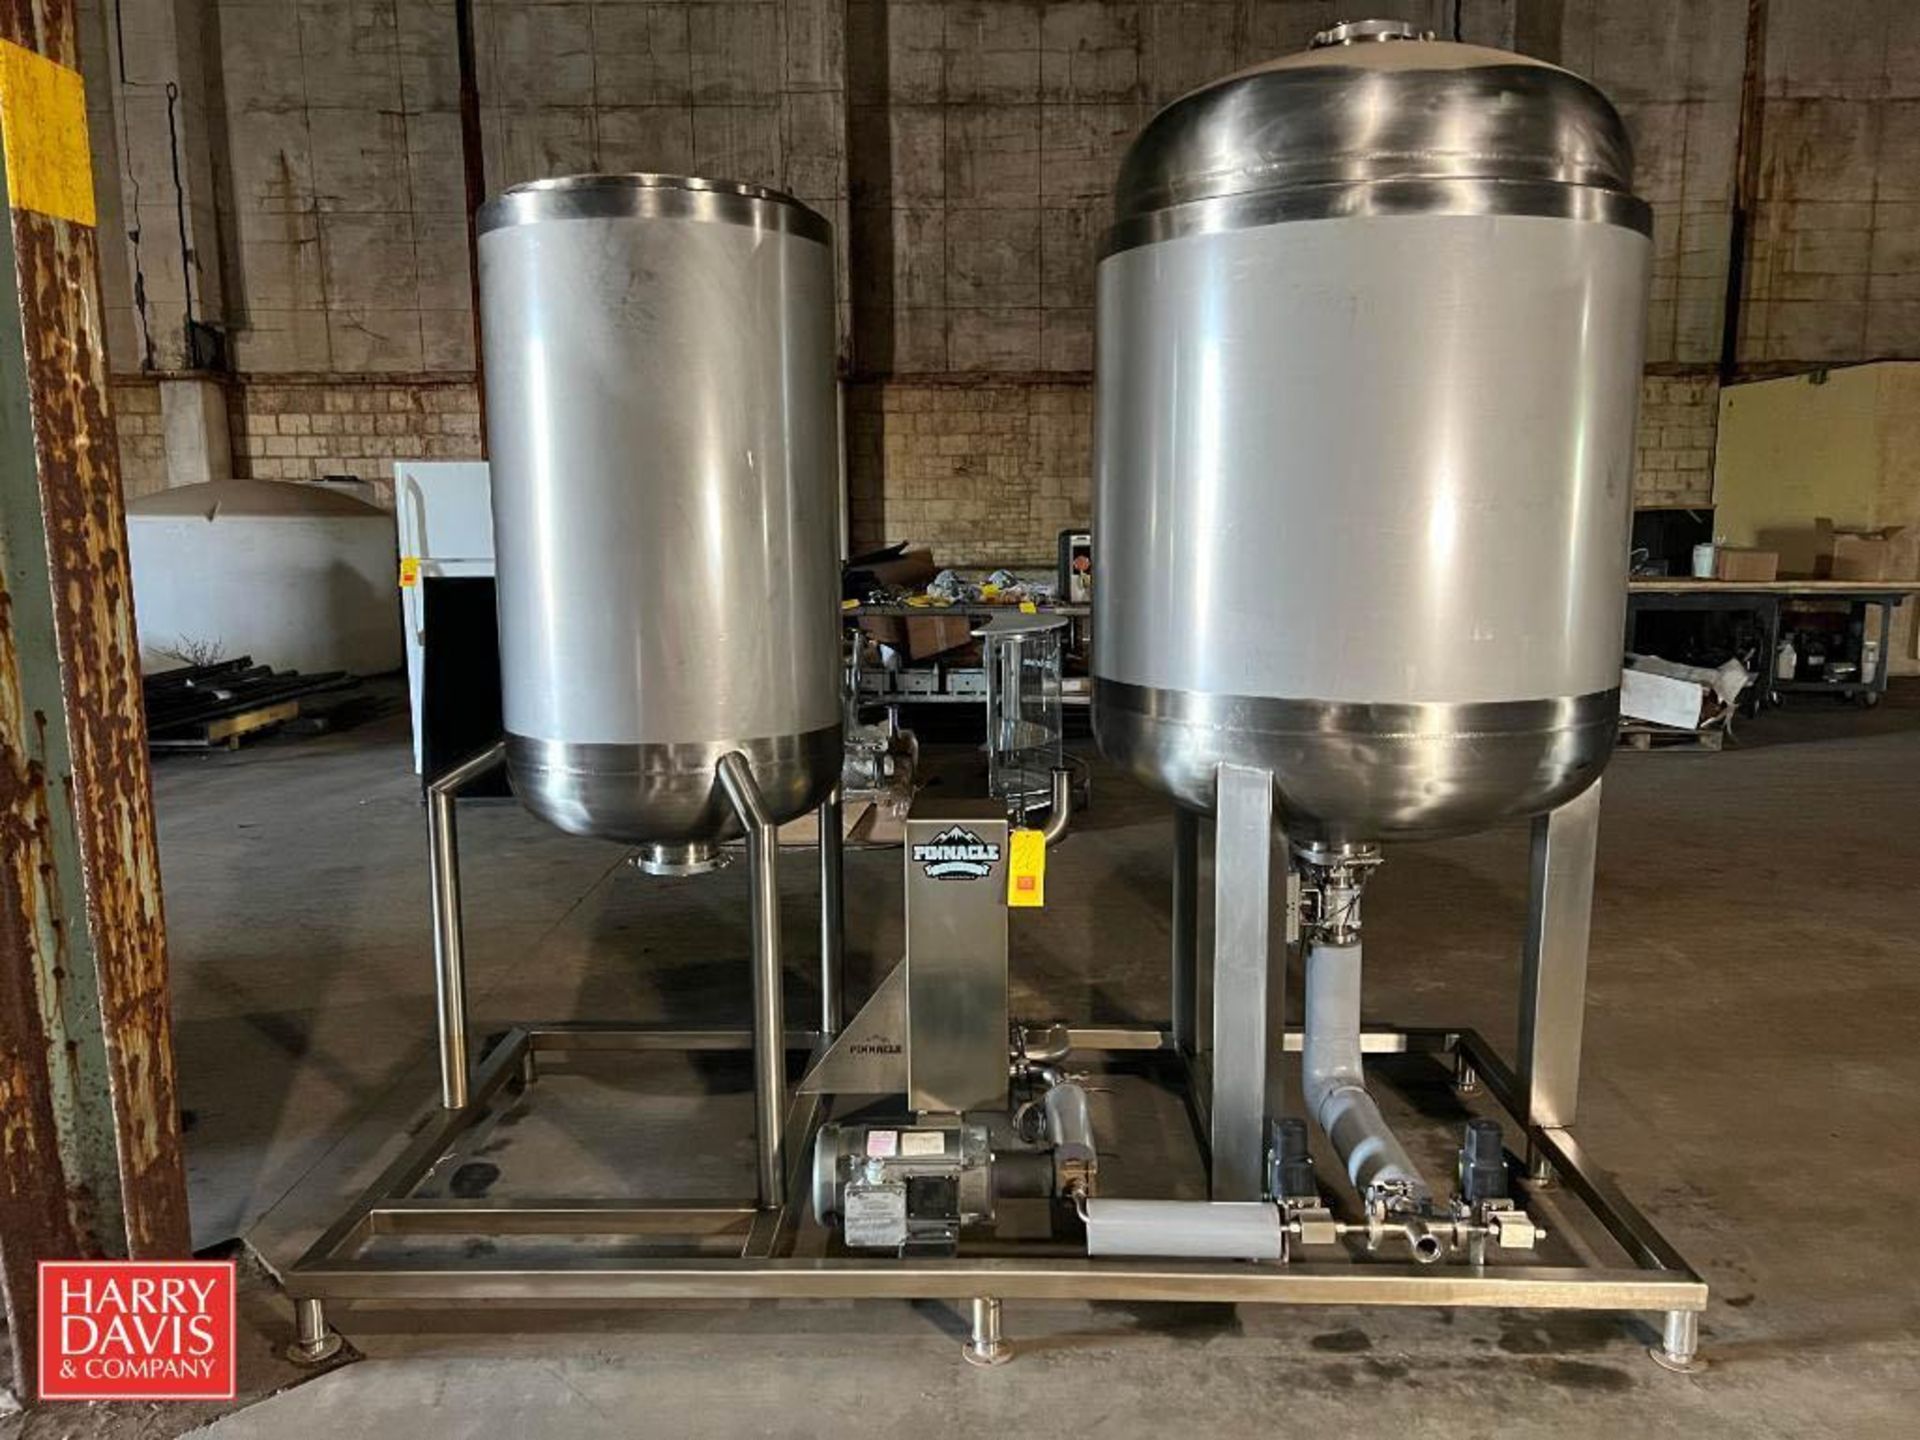 Pinnacle Stainless Ethanol Chilling System, S/N: PSRS-072-19 with 200 Gallon and 90 Gallon S/S Tanks